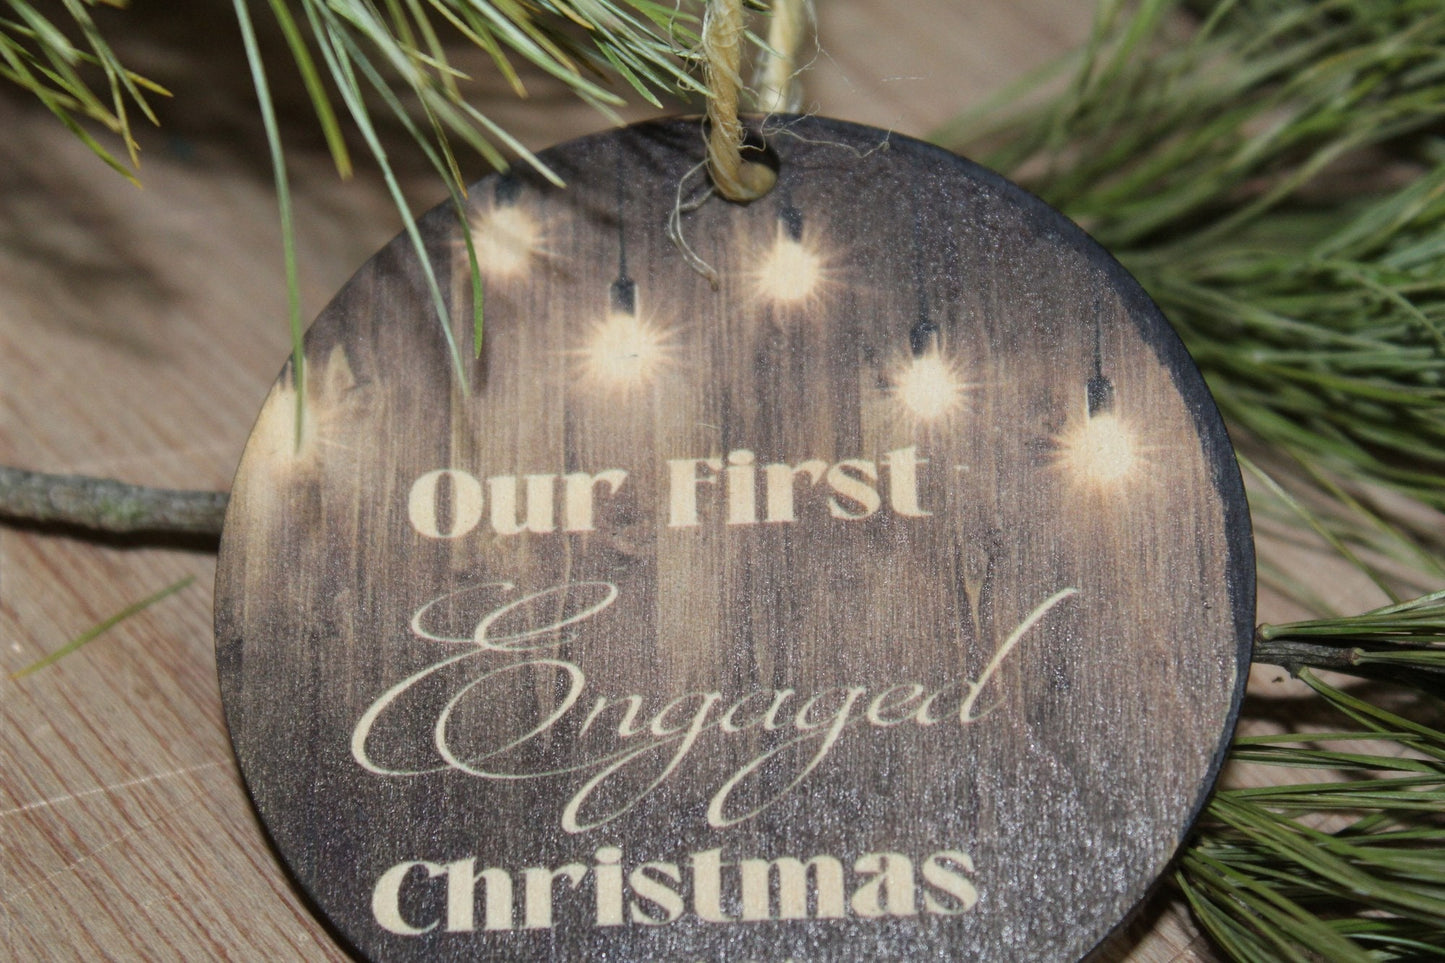 Engaged Celebrate Ornament Our First Christmas Engaged Wood Slice Christmas Tree Primitive Rustic Tree Printed Light Bulb Barn Wood